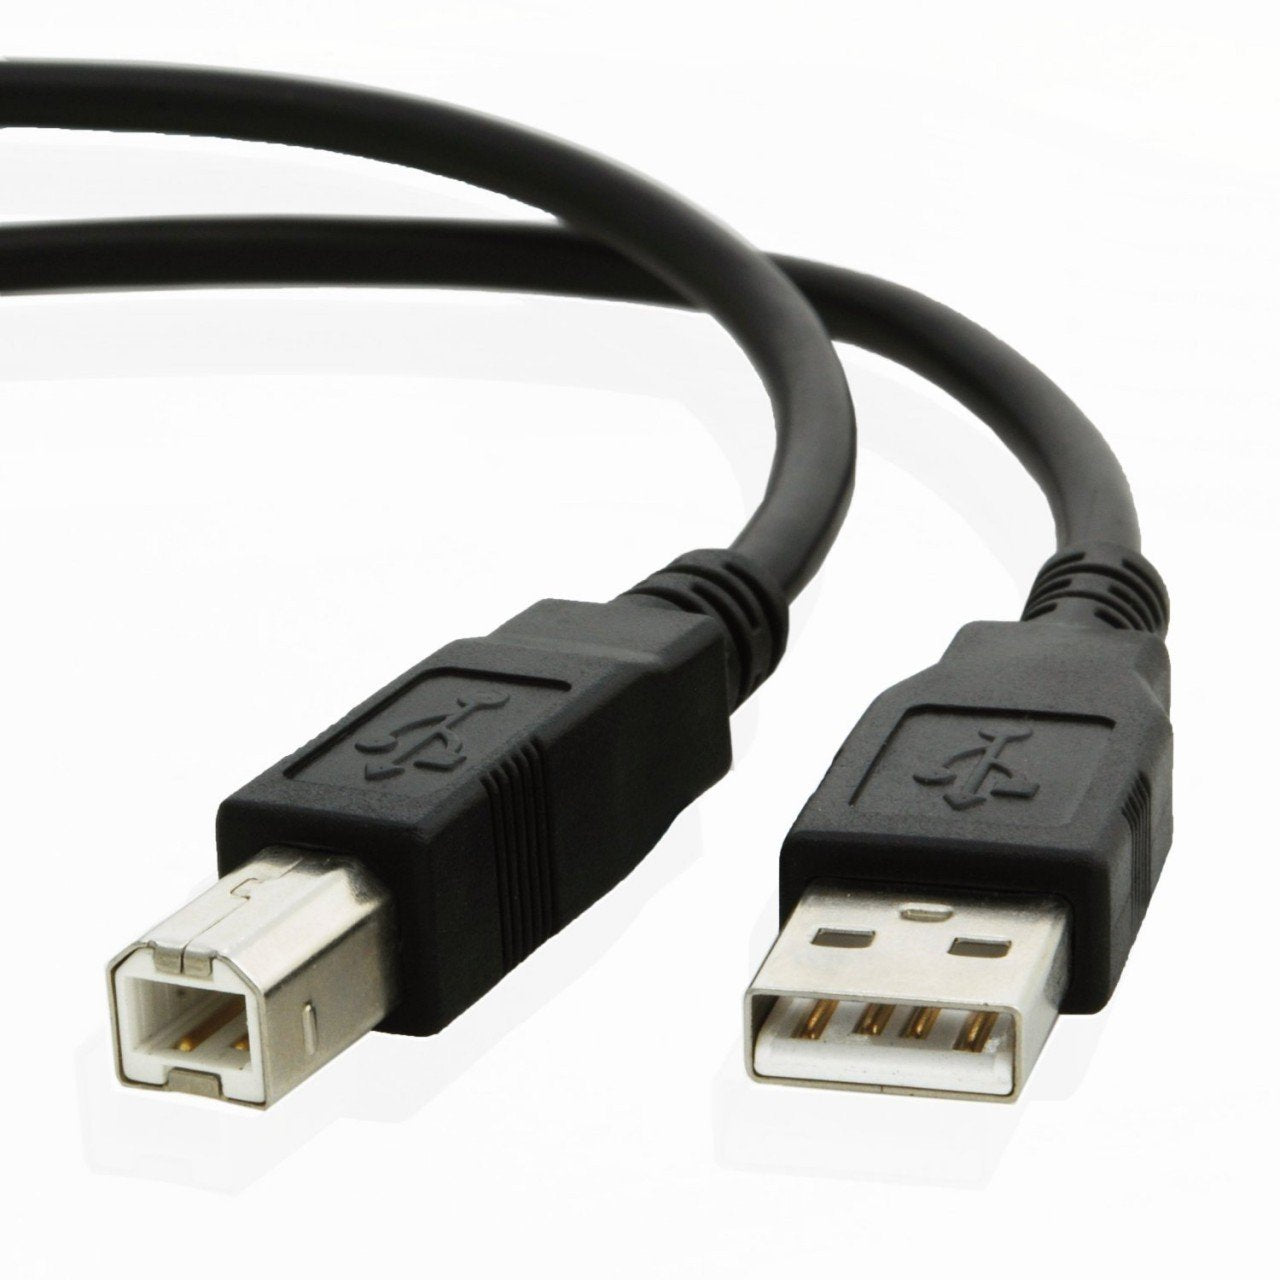 USB cable for Epson OMNILINK TM-L90